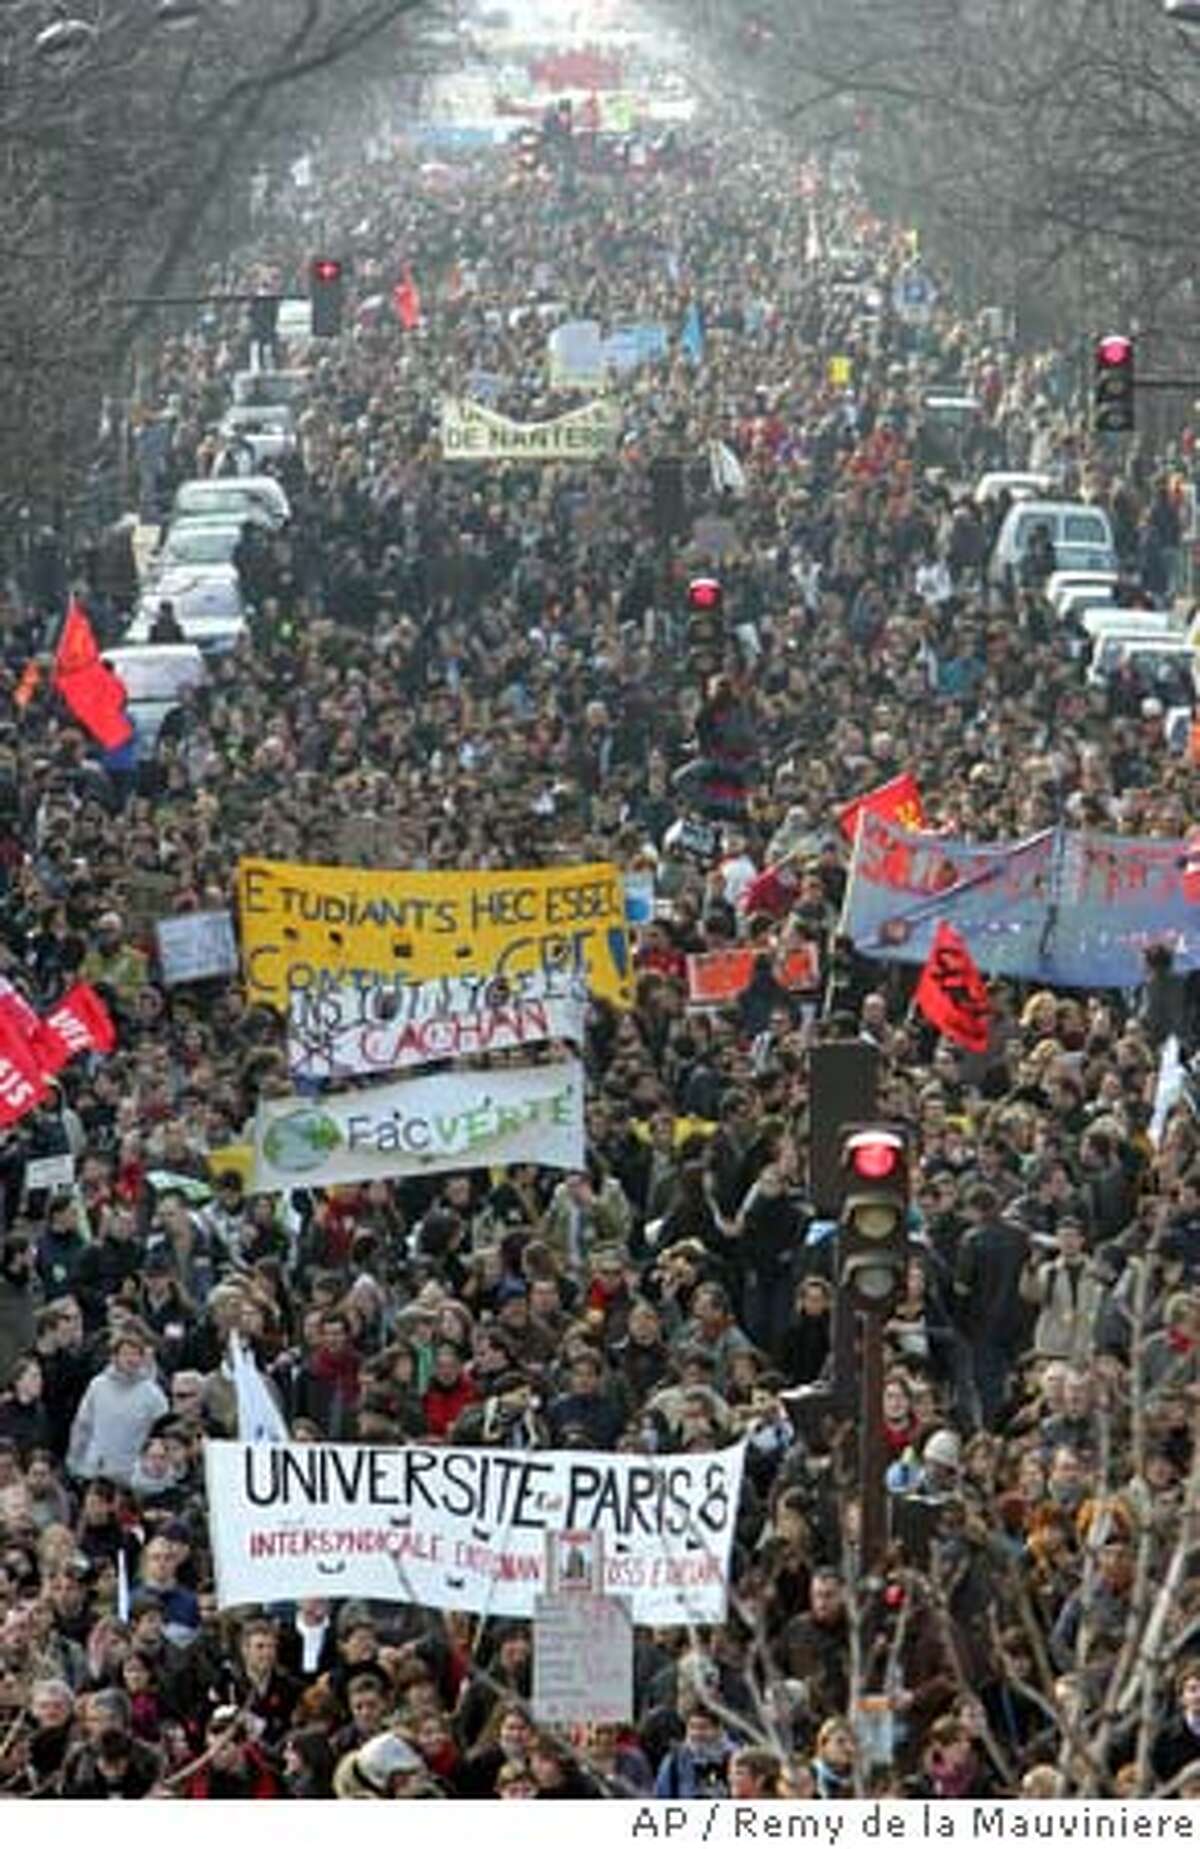 Students and workers march in Paris, France, on Saturday March 18, 2006, during a demonstration against the "First Job Contract", a jobs plan known as CPE.(AP Photo/Remy de la Mauviniere)